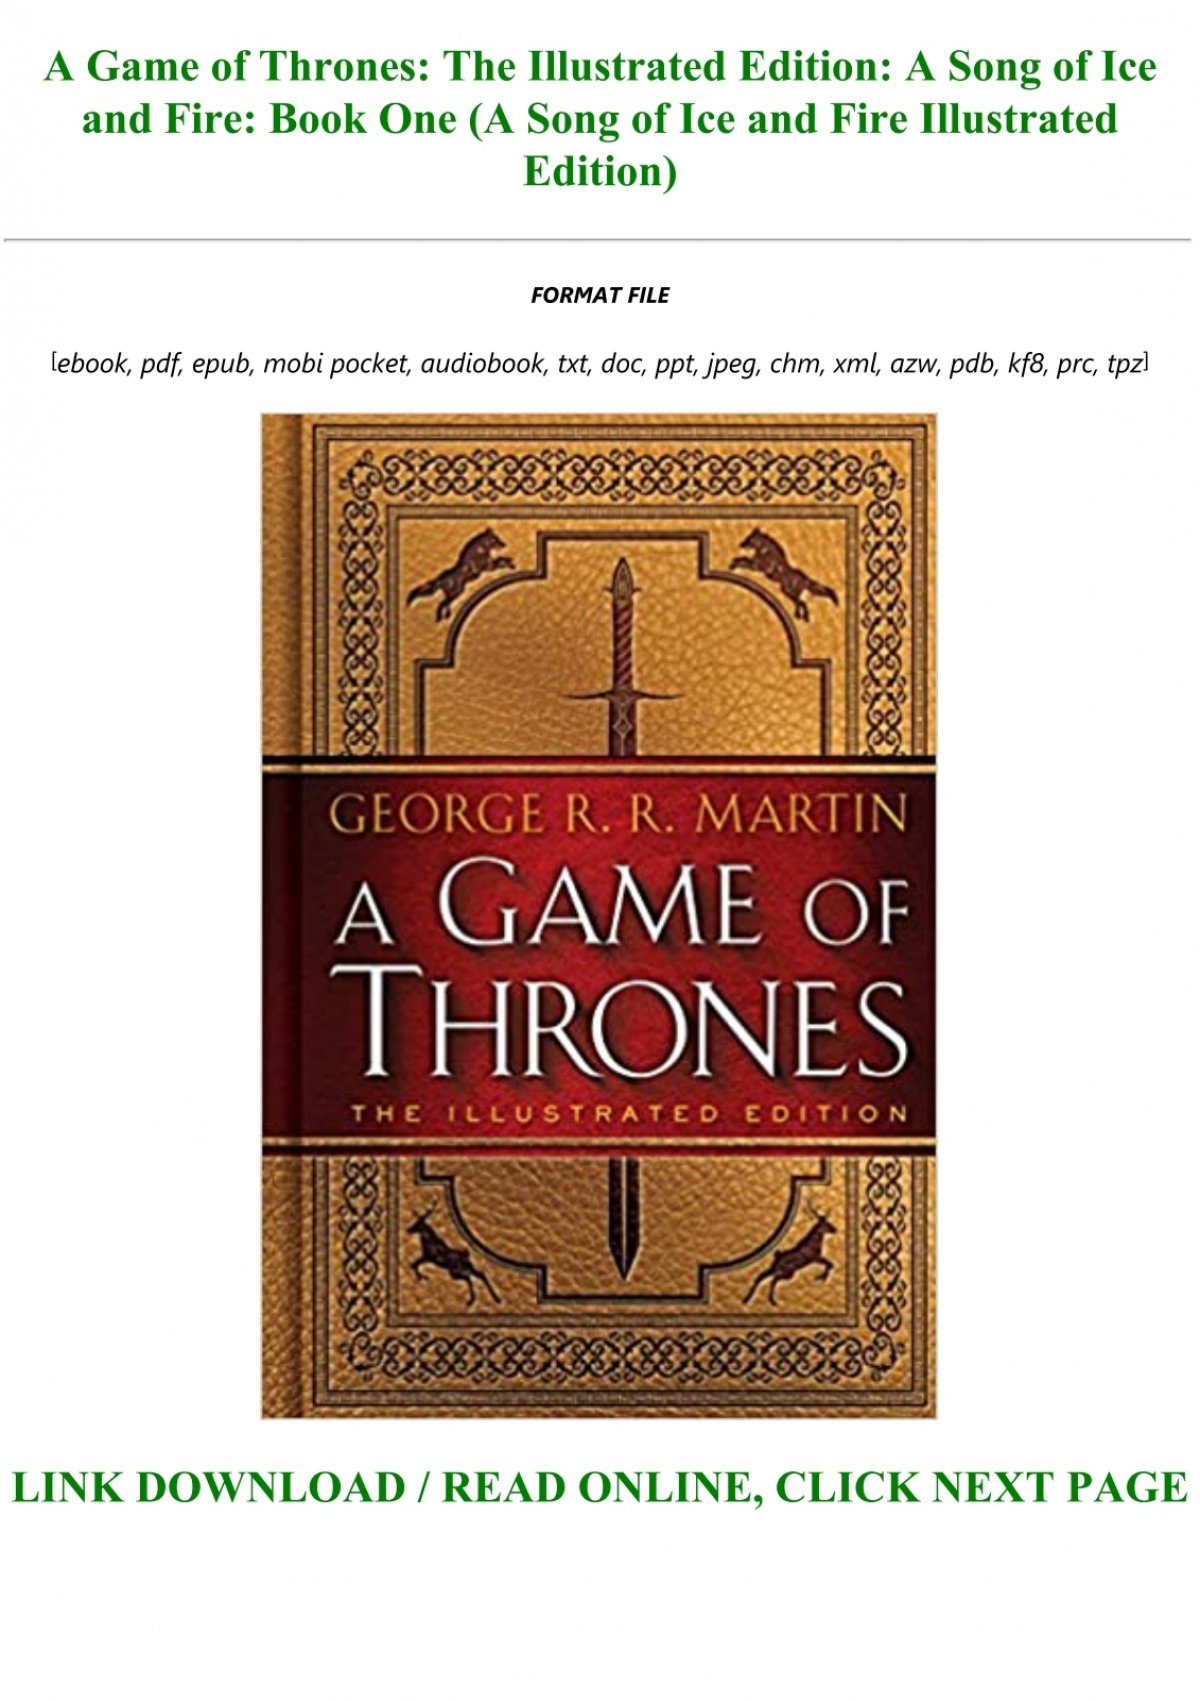 a song of ice and fire illustrated edition pdf download